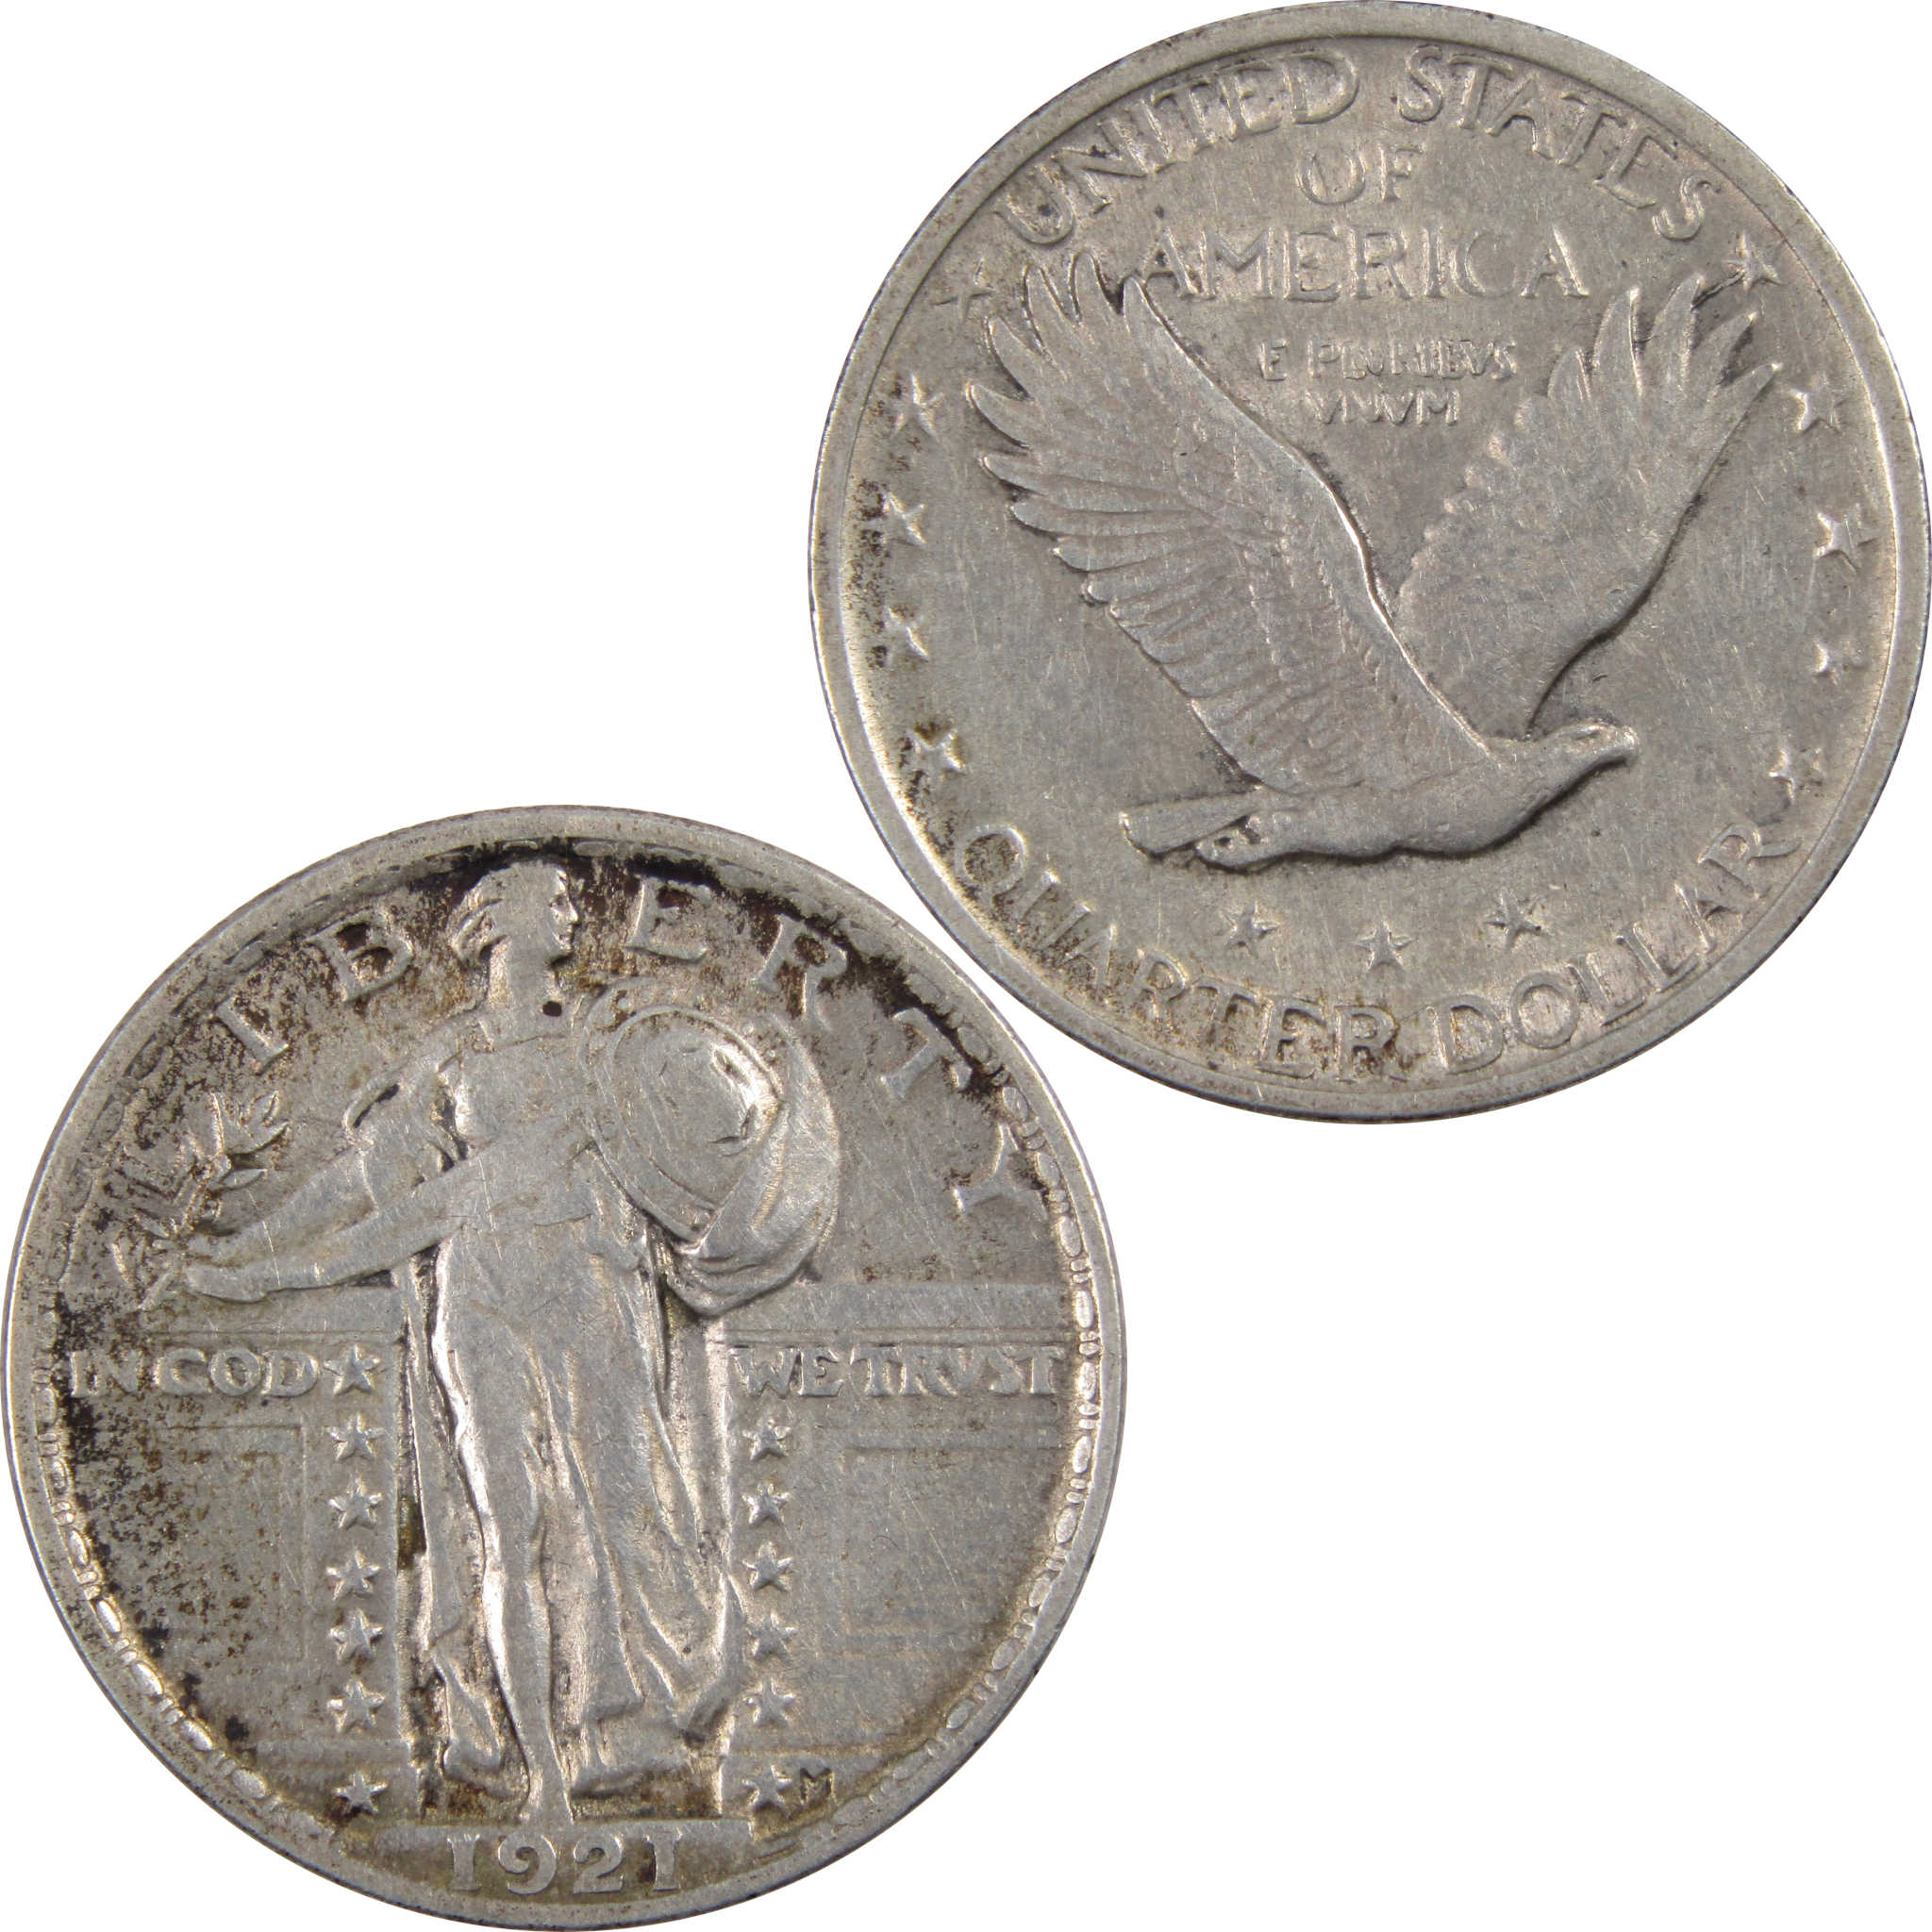 1921 Standing Liberty Quarter XF EF Extremely Fine Silver SKU:I3502